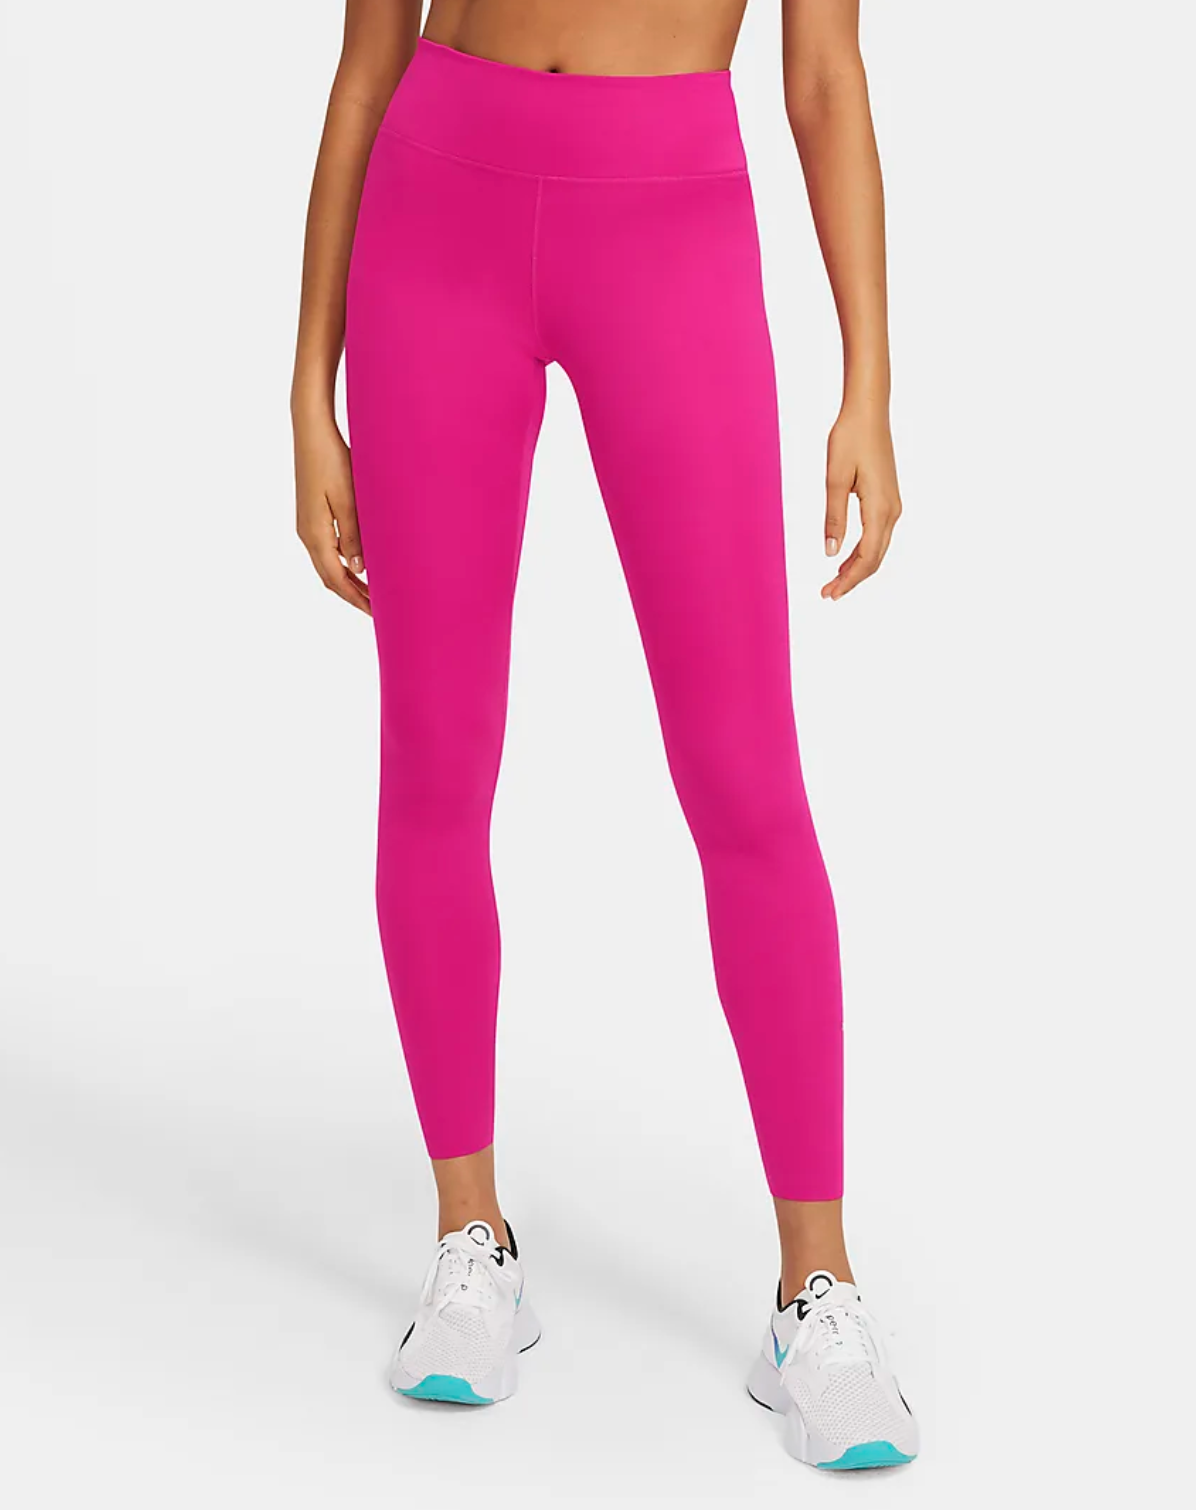 Women's One Luxe Mid-Rise Leggings.png 